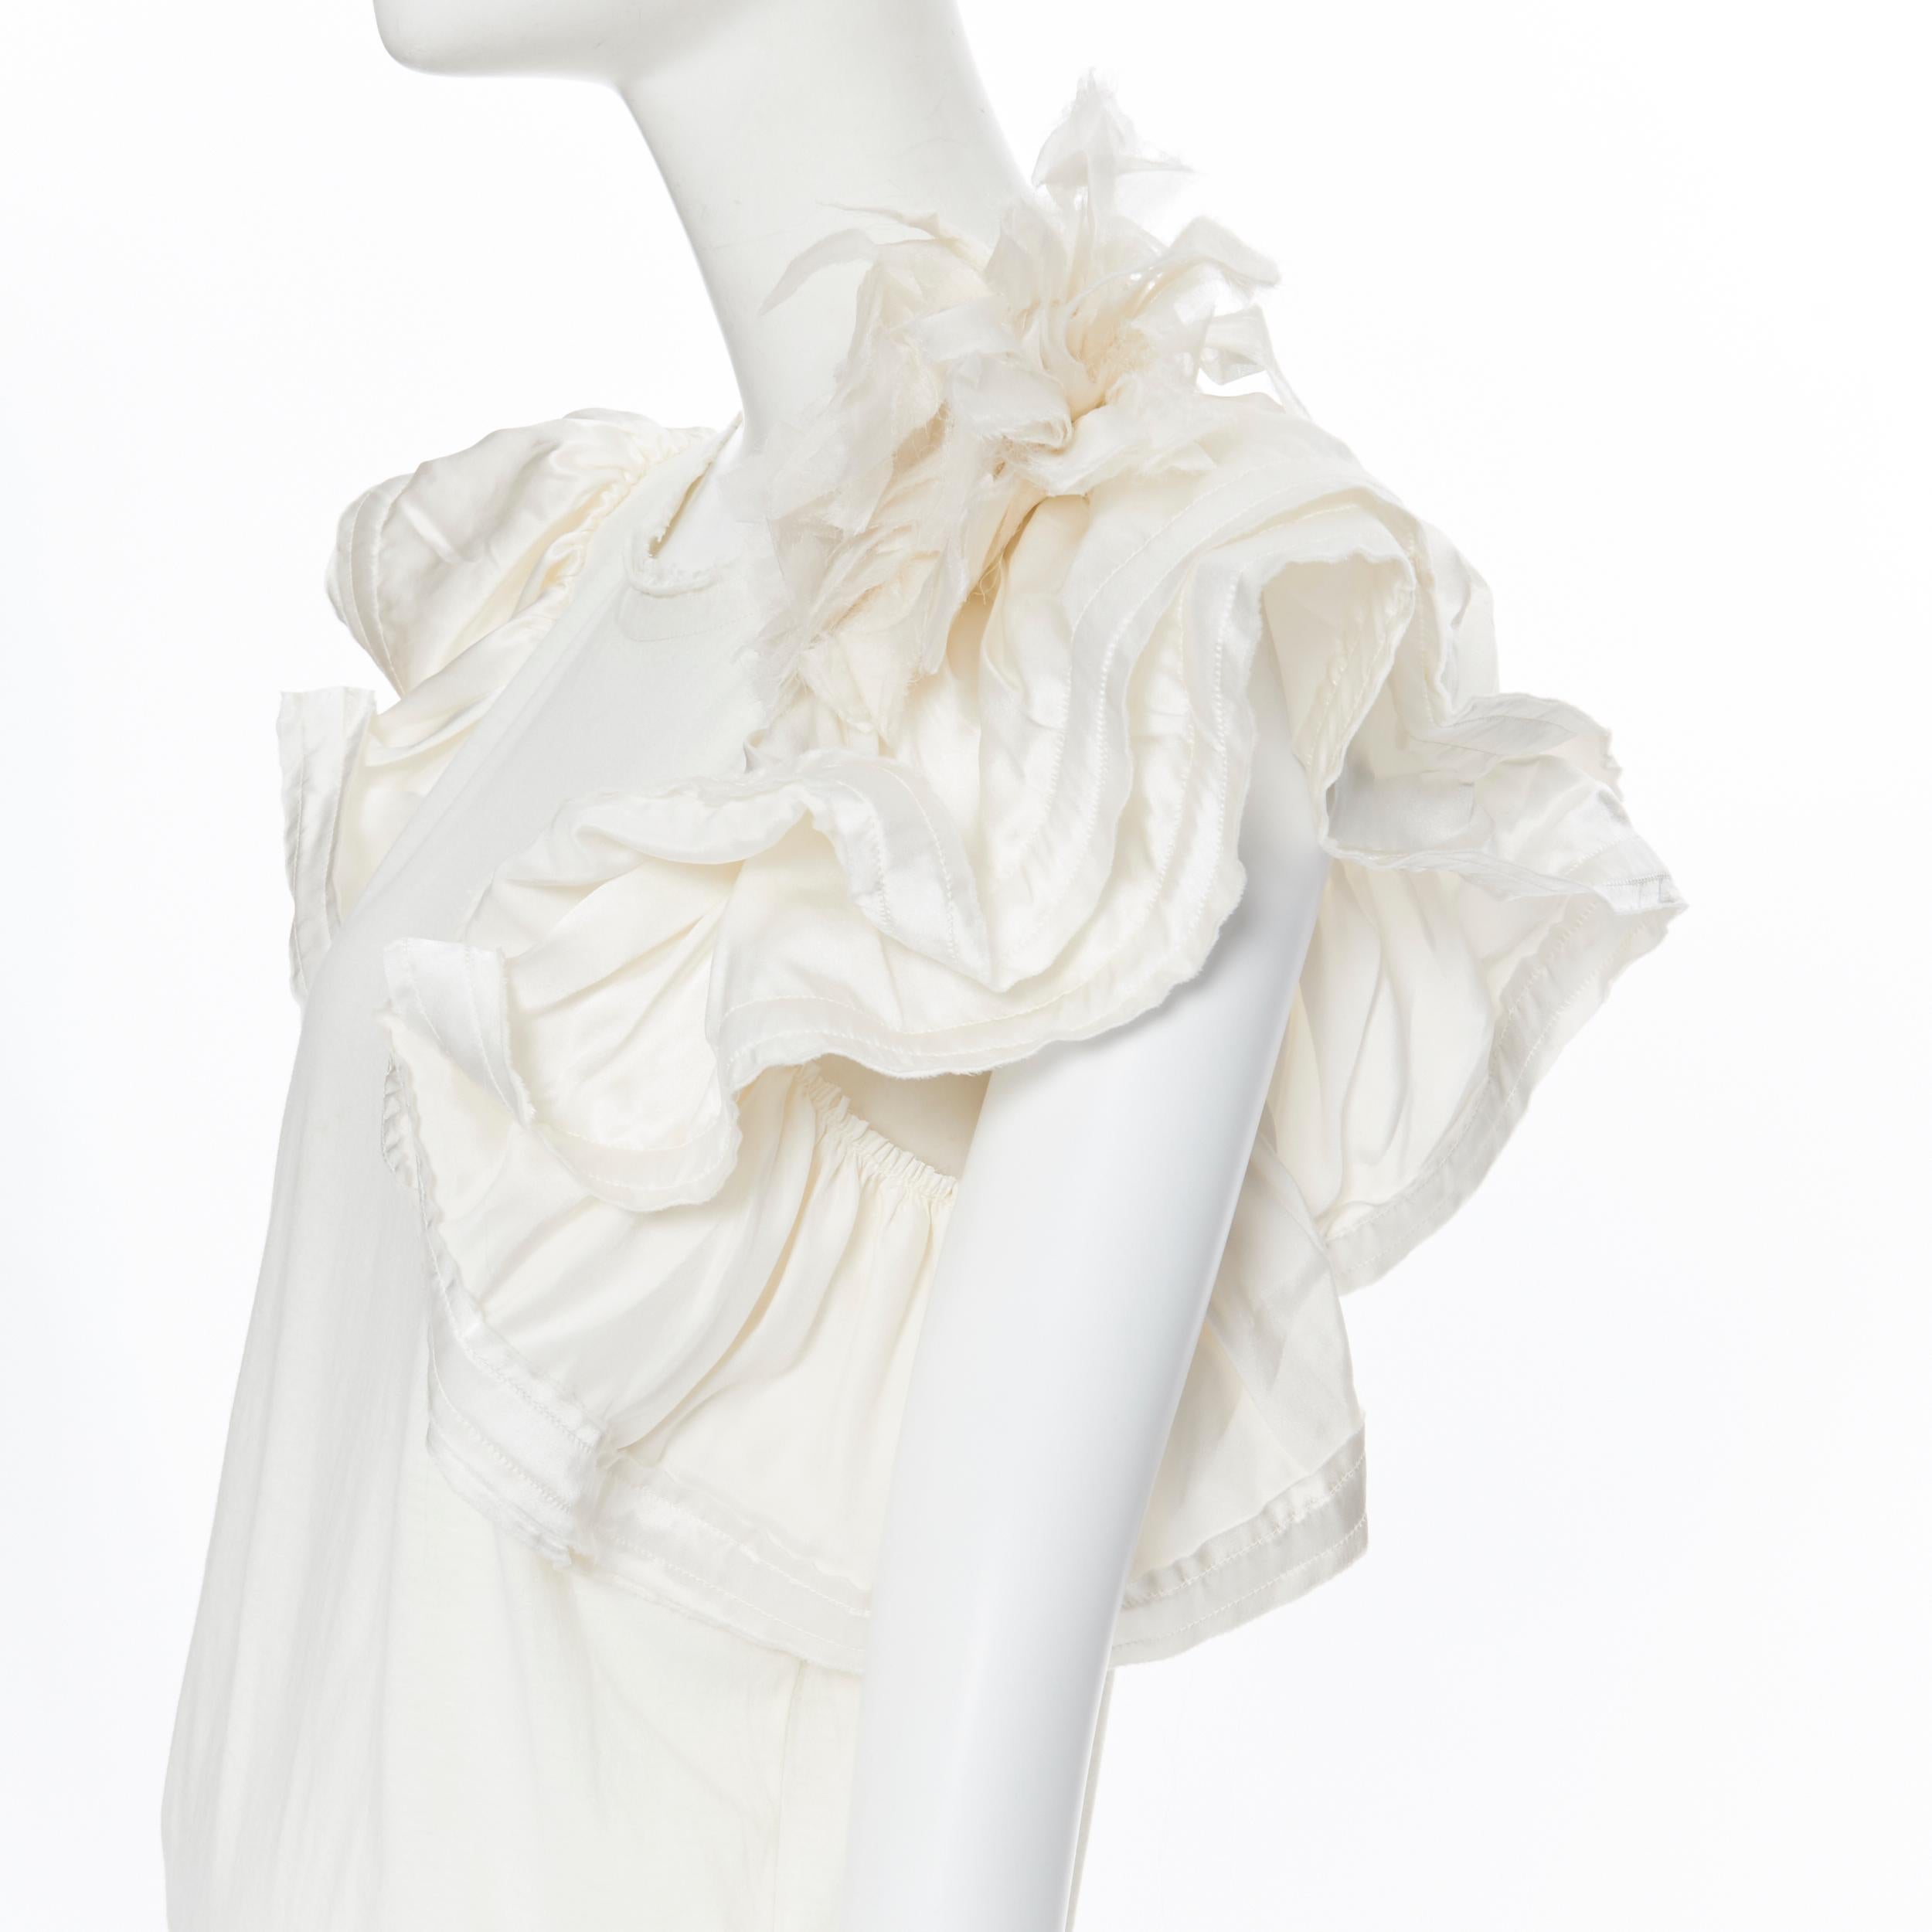 LANVIN Elbaz Collection Blanche white cotton tiered ruffle silk sleeve top XS
Brand: Lanvin
Designer: Alber Elbaz
Collection: Collection Blanche
Model Name / Style: Ruffle sleeve top
Material: Cotton, silk
Color: White
Pattern: Solid
Extra Detail: